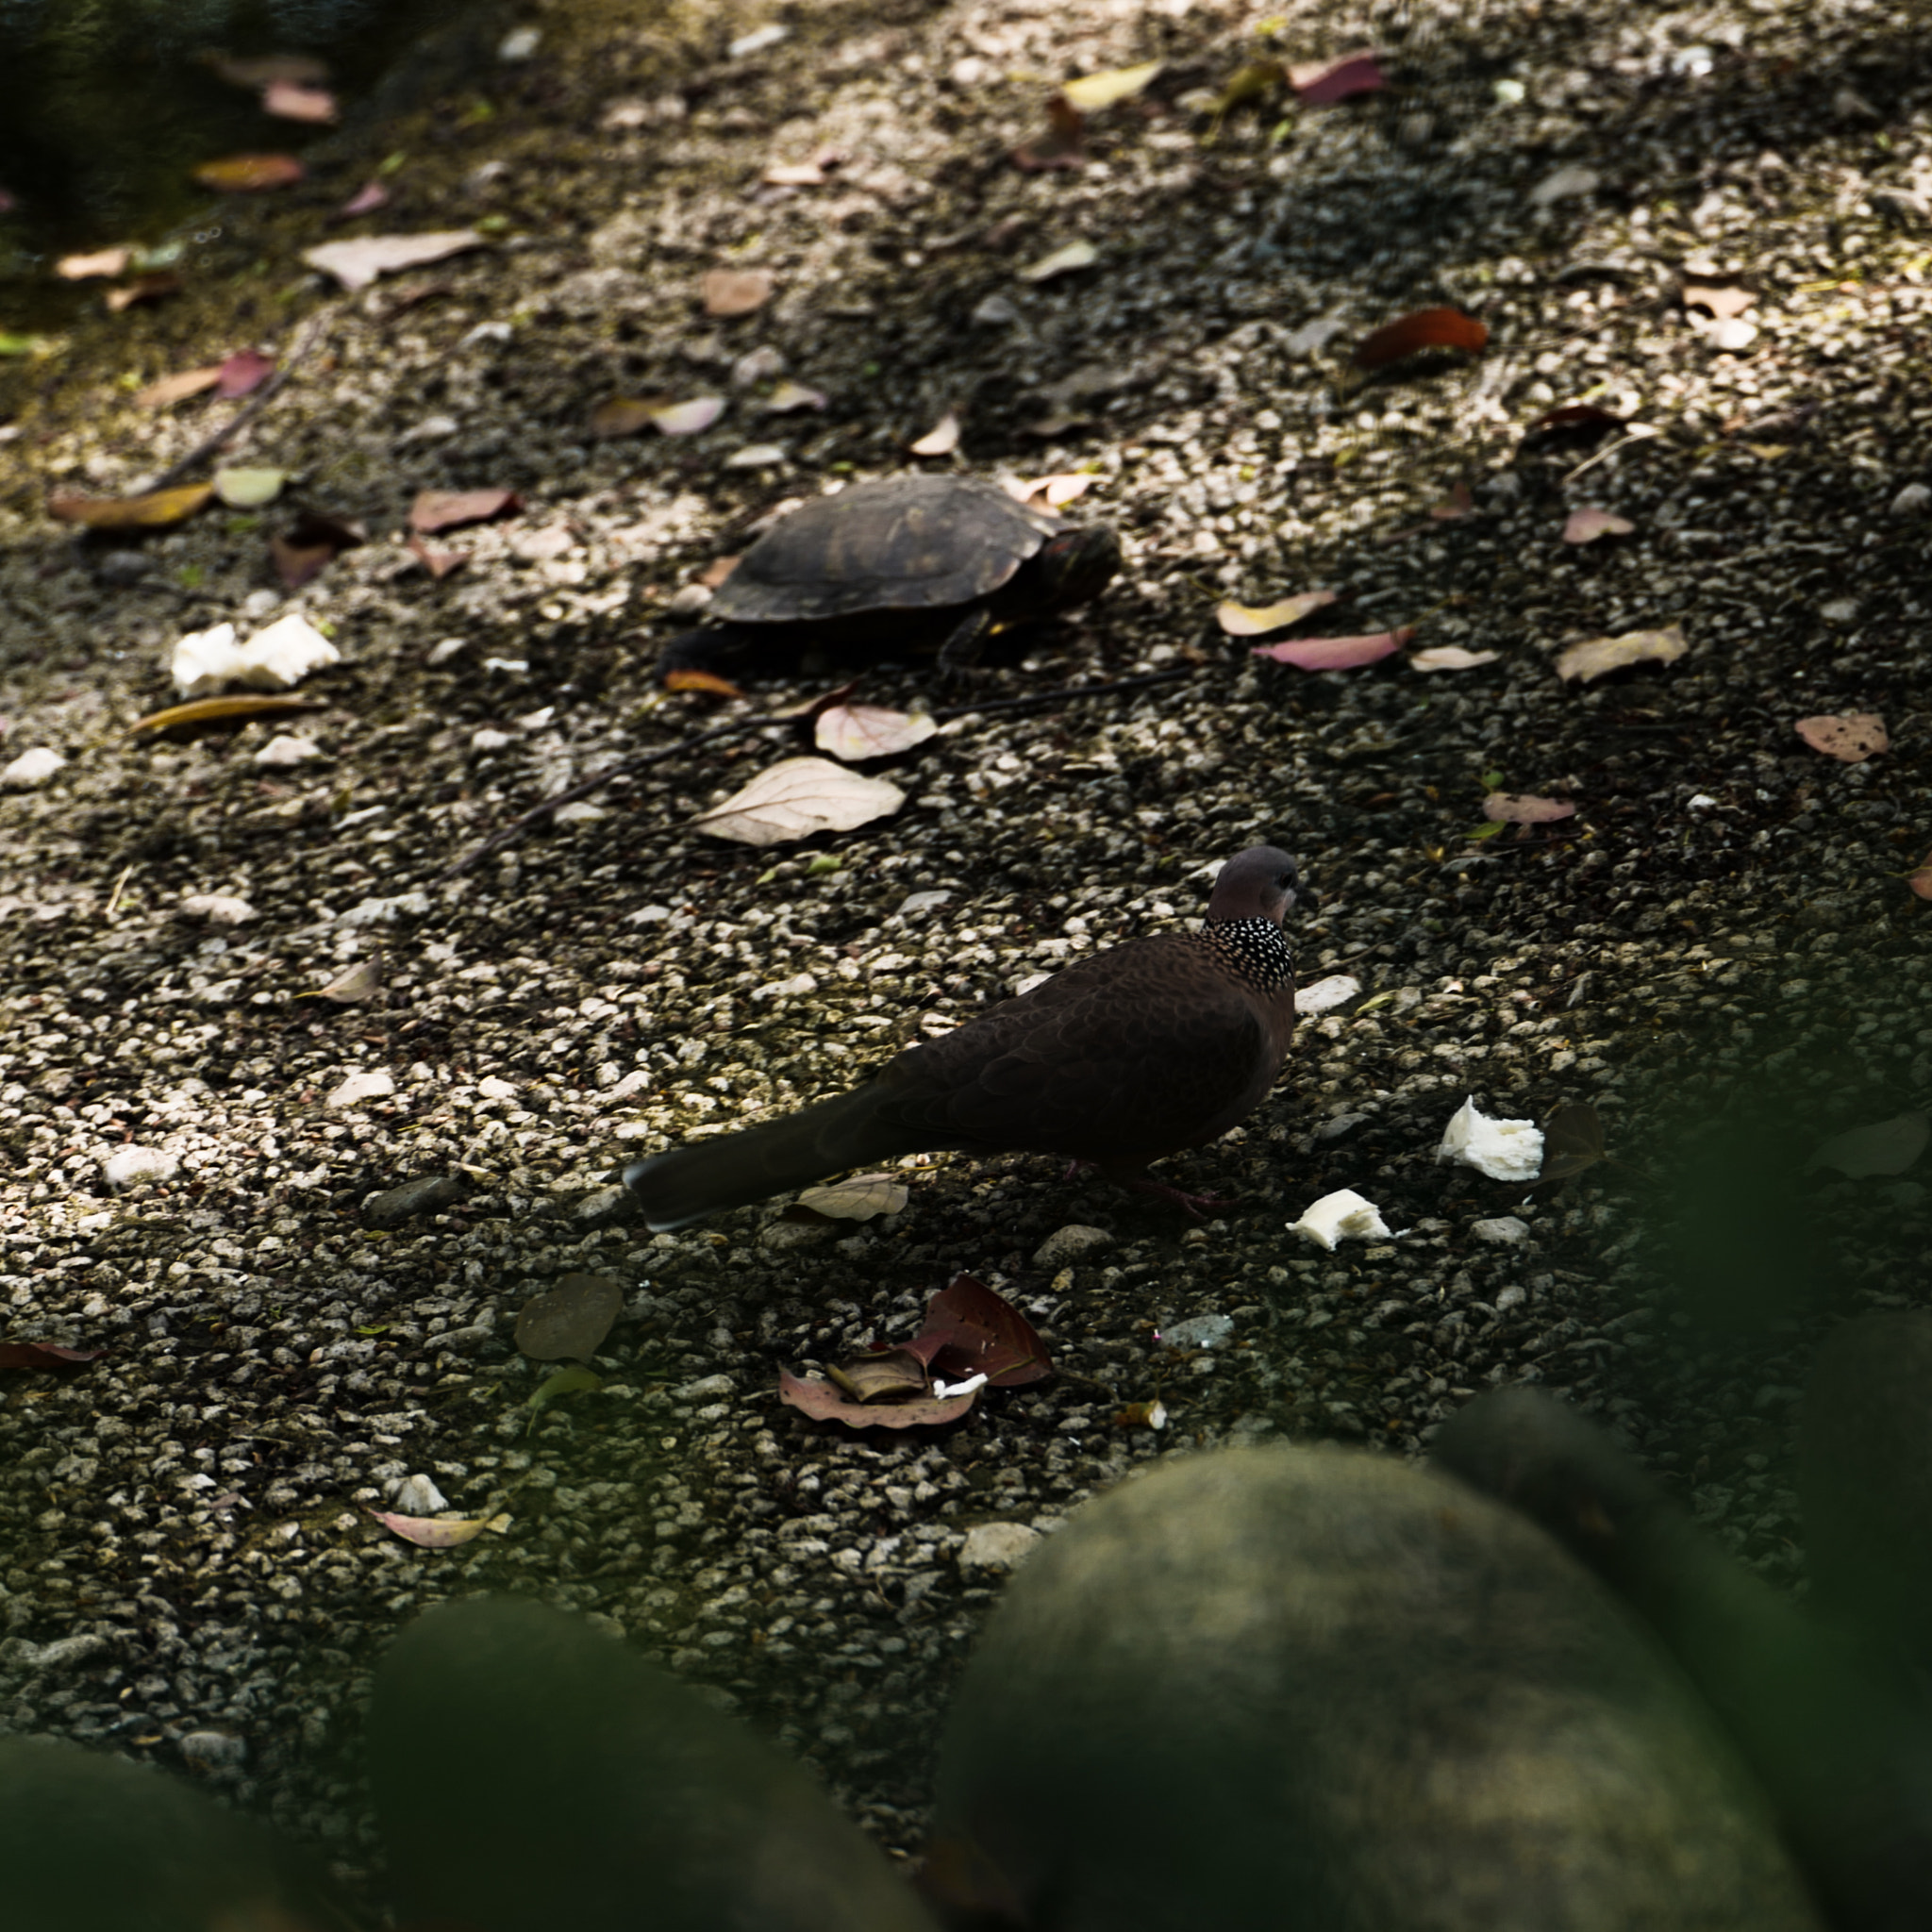 VARIO-ELMARIT 1:2.8-4.0/24-90mm ASPH. OIS sample photo. The basking turtle and bird in temple photography